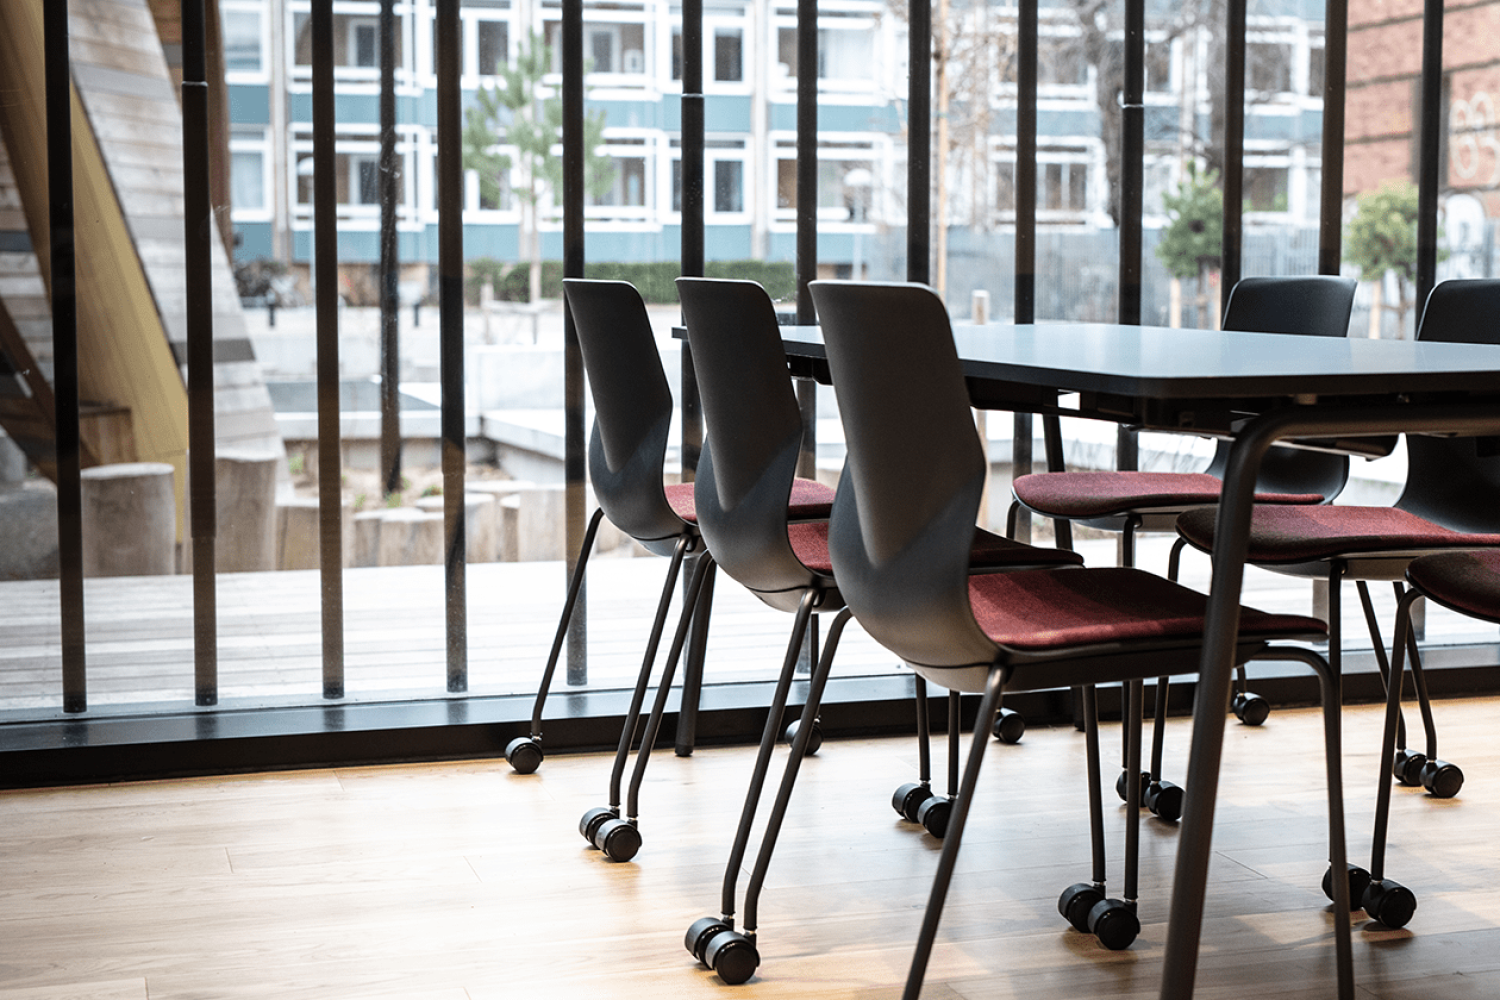 Canteen furniture including black table and chairs in a dining room.